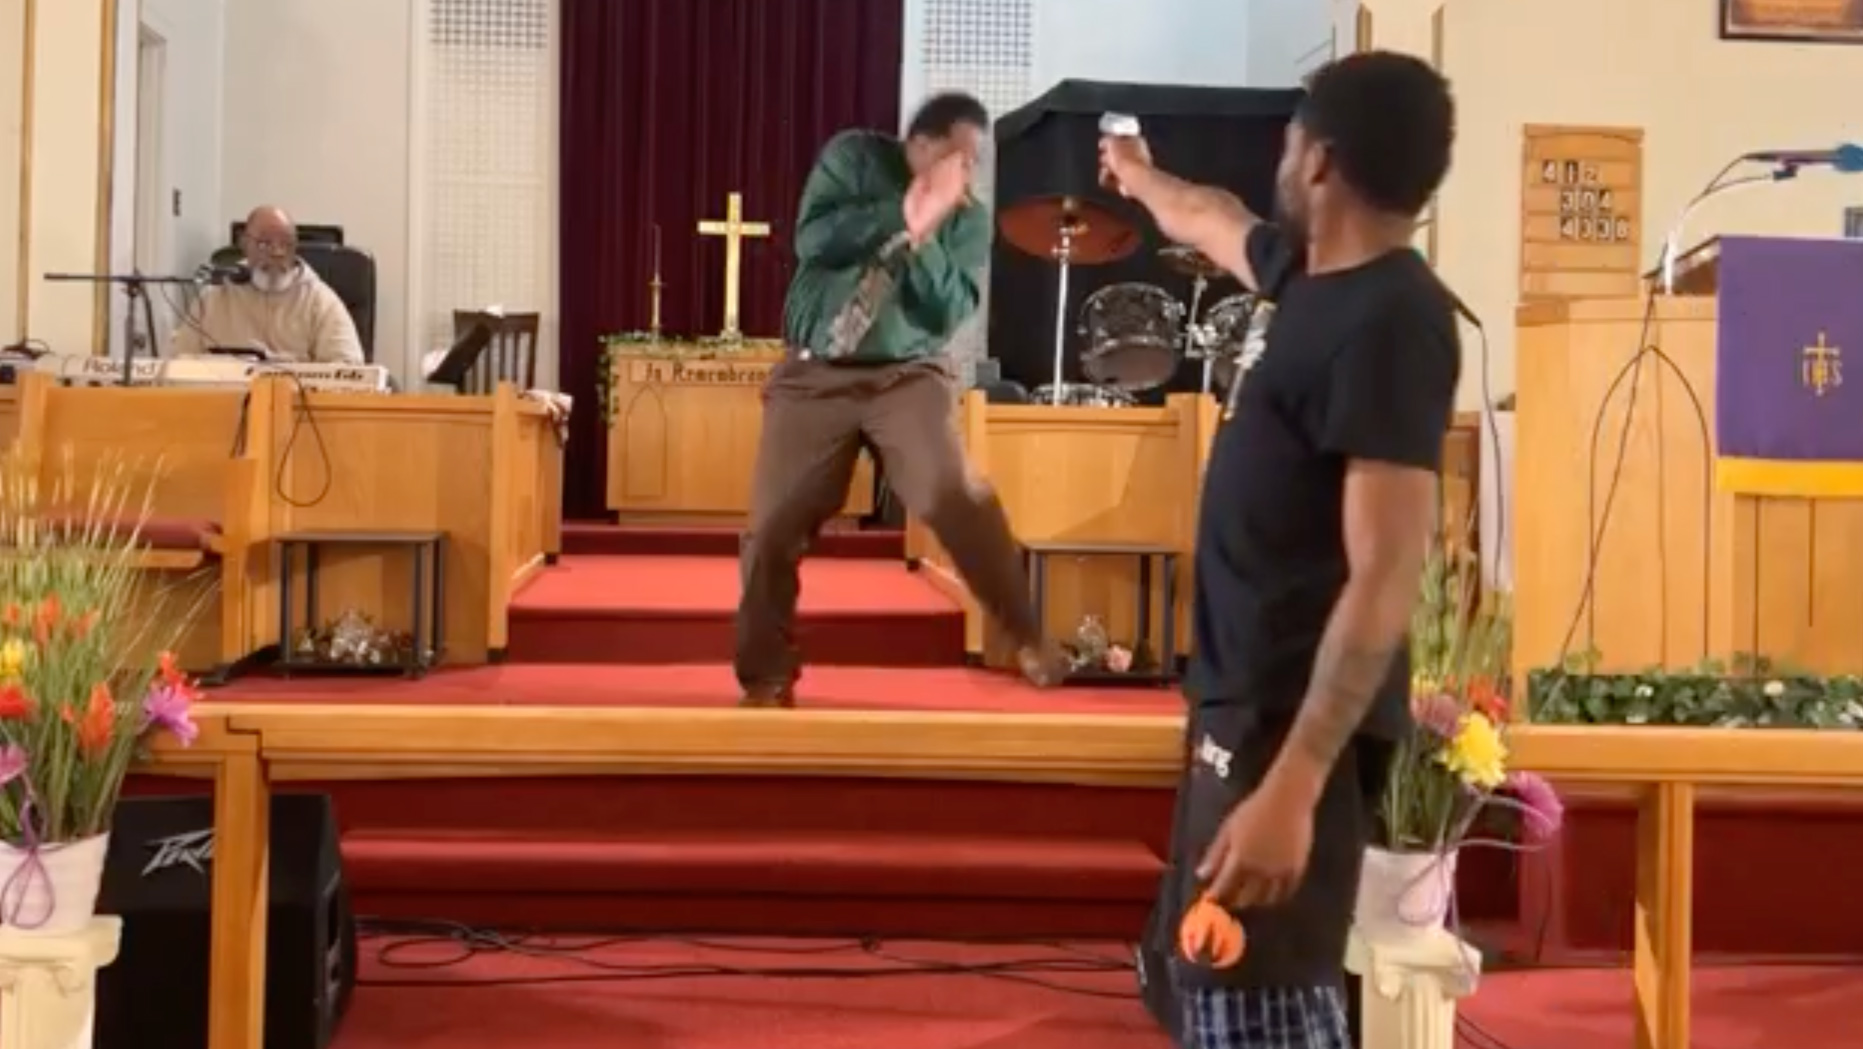 Video: Man Attempts to Shoot Pastor During Sermon, Gets Tackled